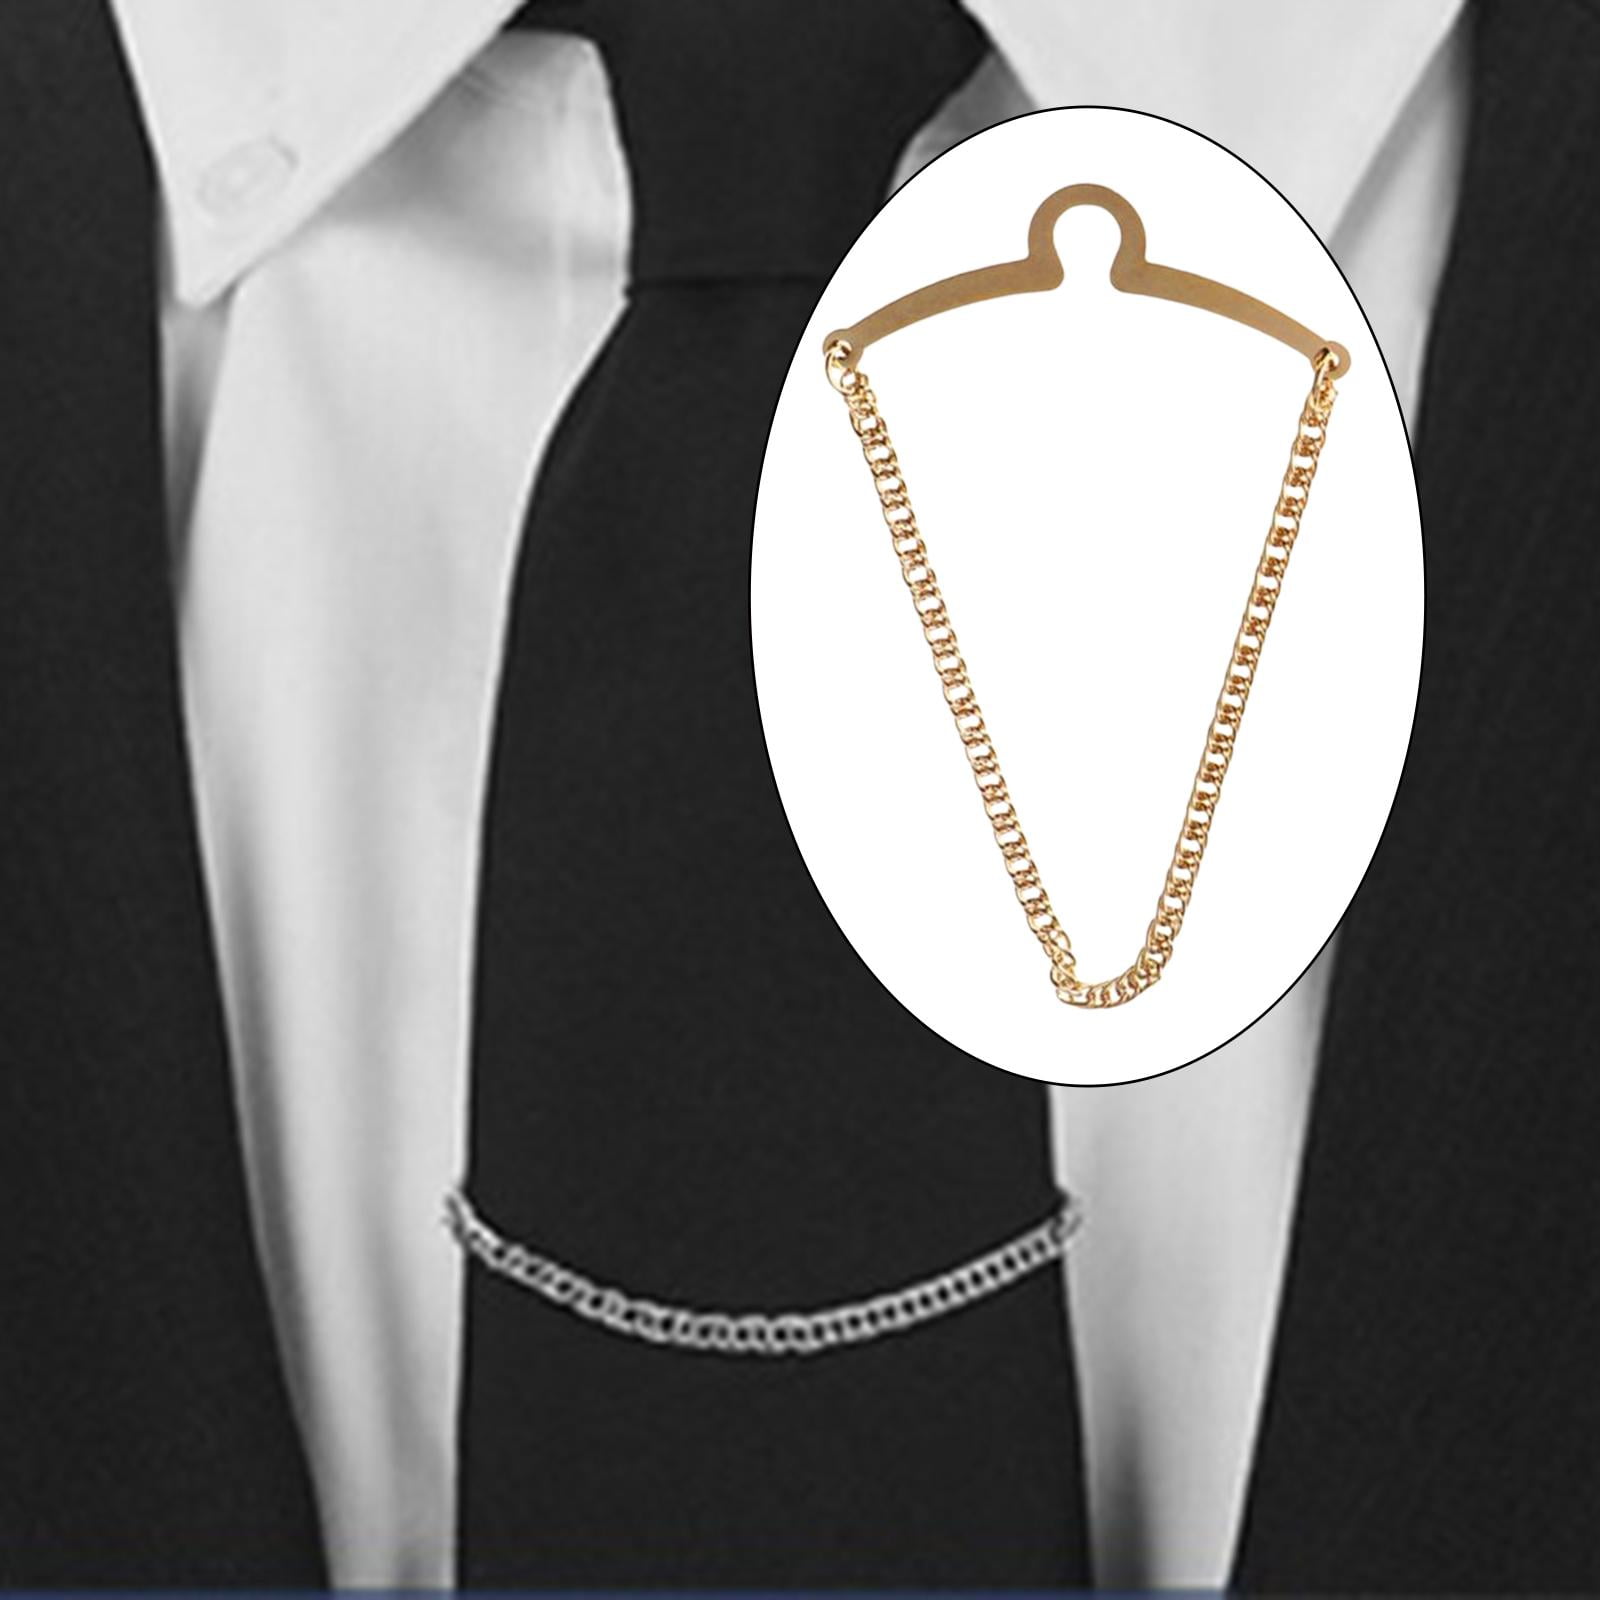 High quality simple Tie pin , Tie clip with chain